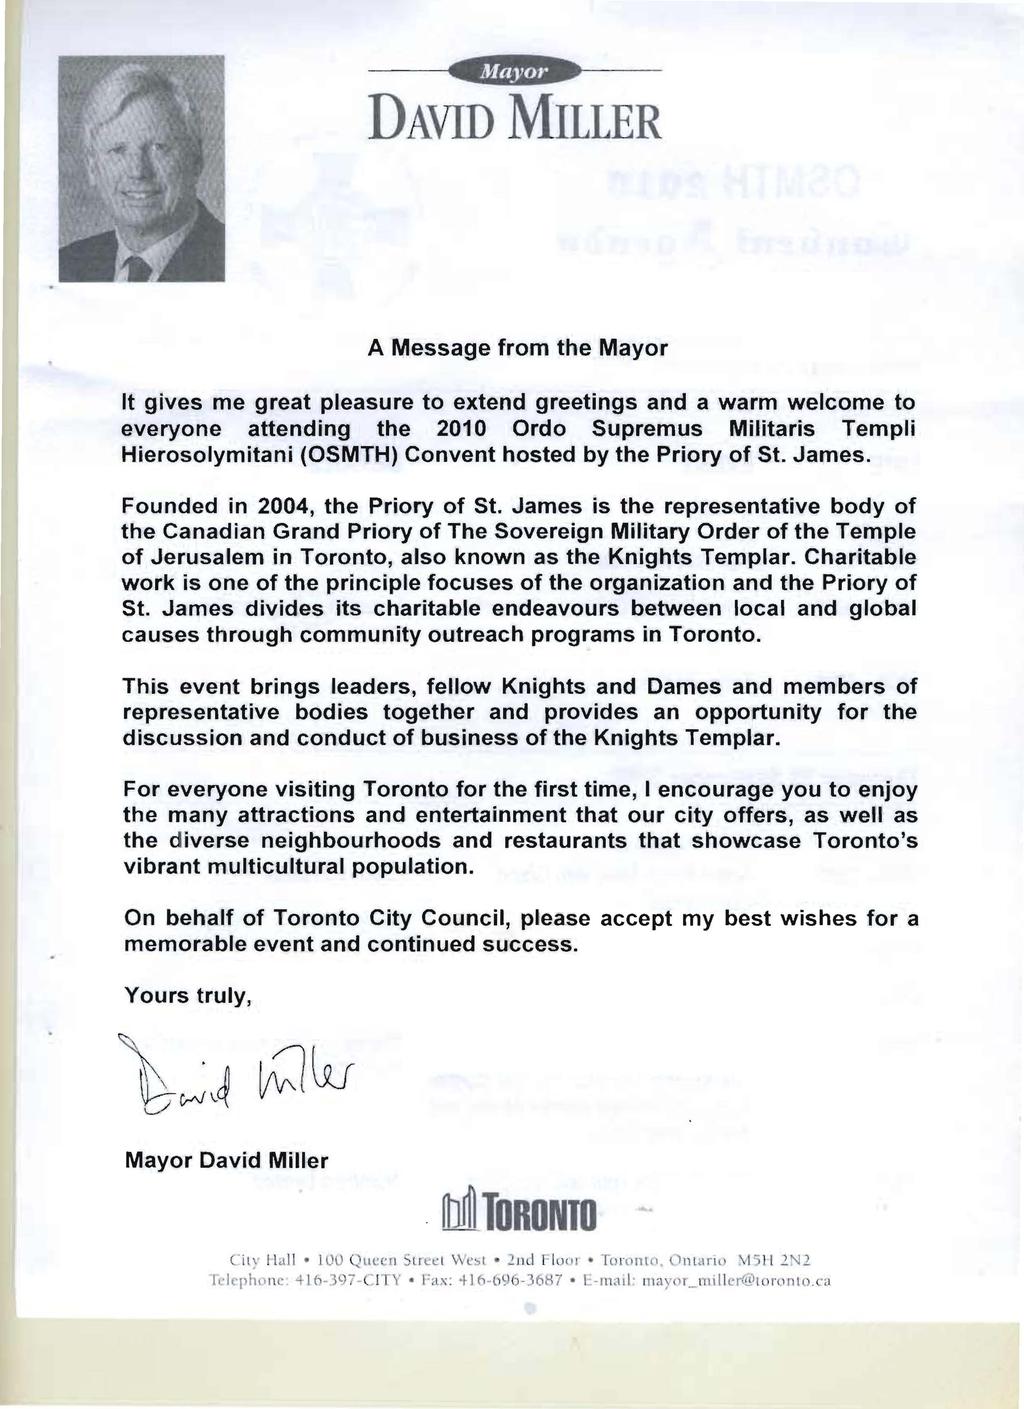 DAVID MILLER A Message fro,m the Mayor It gives me great pleasure to extend greetings and a warm welcome to everyone attending the 2010 Ordo Supremus Militaris Templi Hierosolymitani (OSMTH) Convent